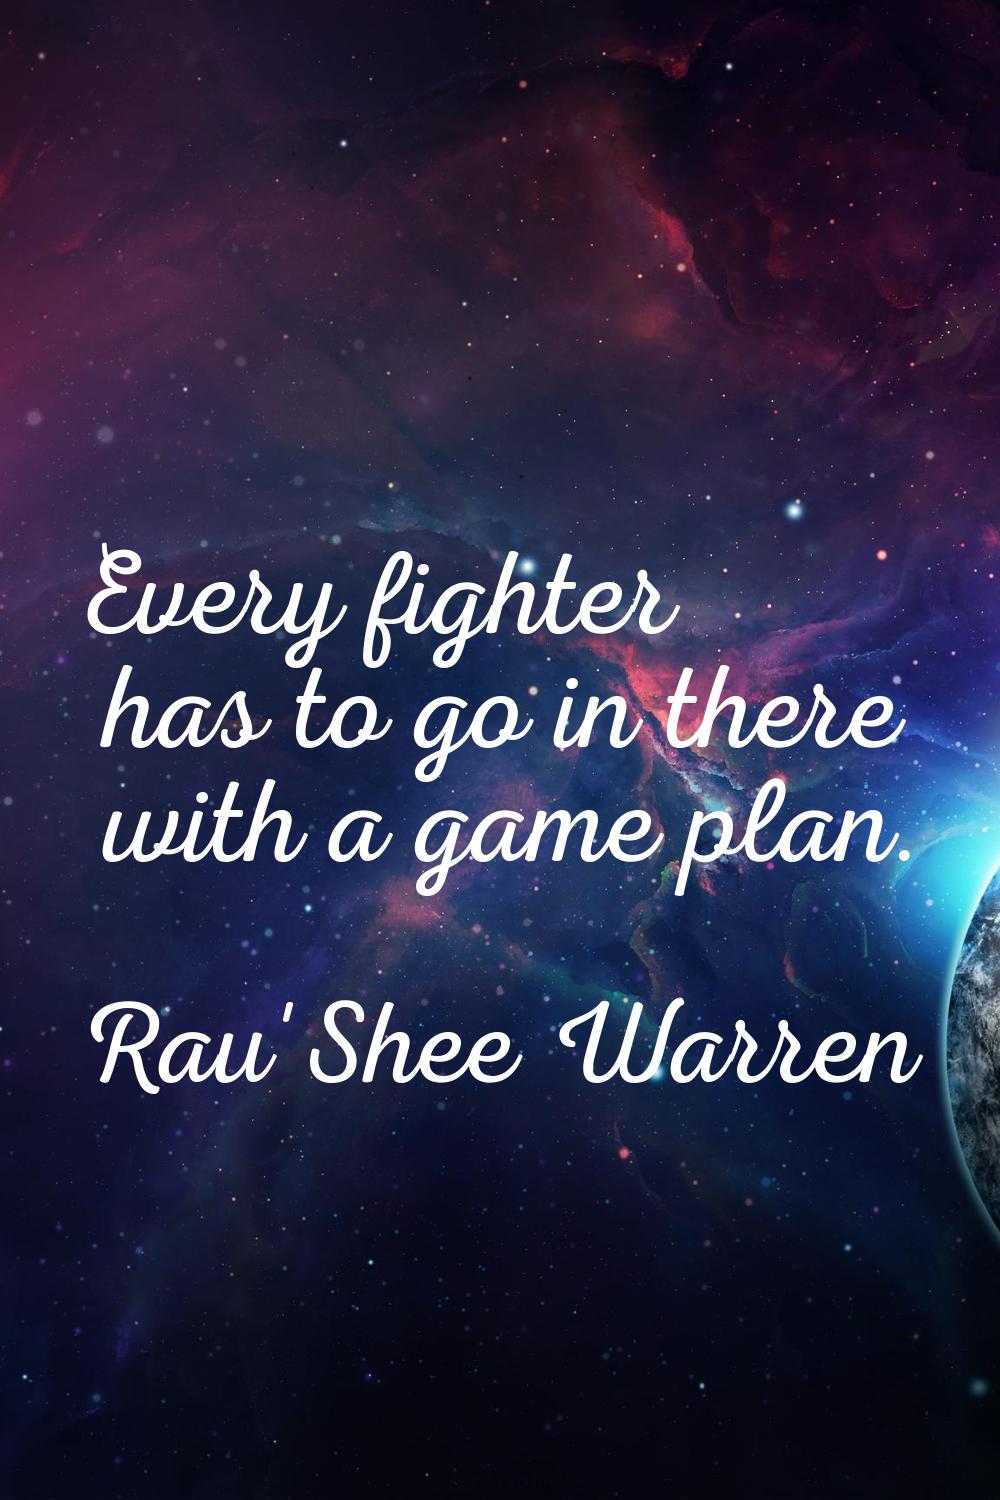 Every fighter has to go in there with a game plan.